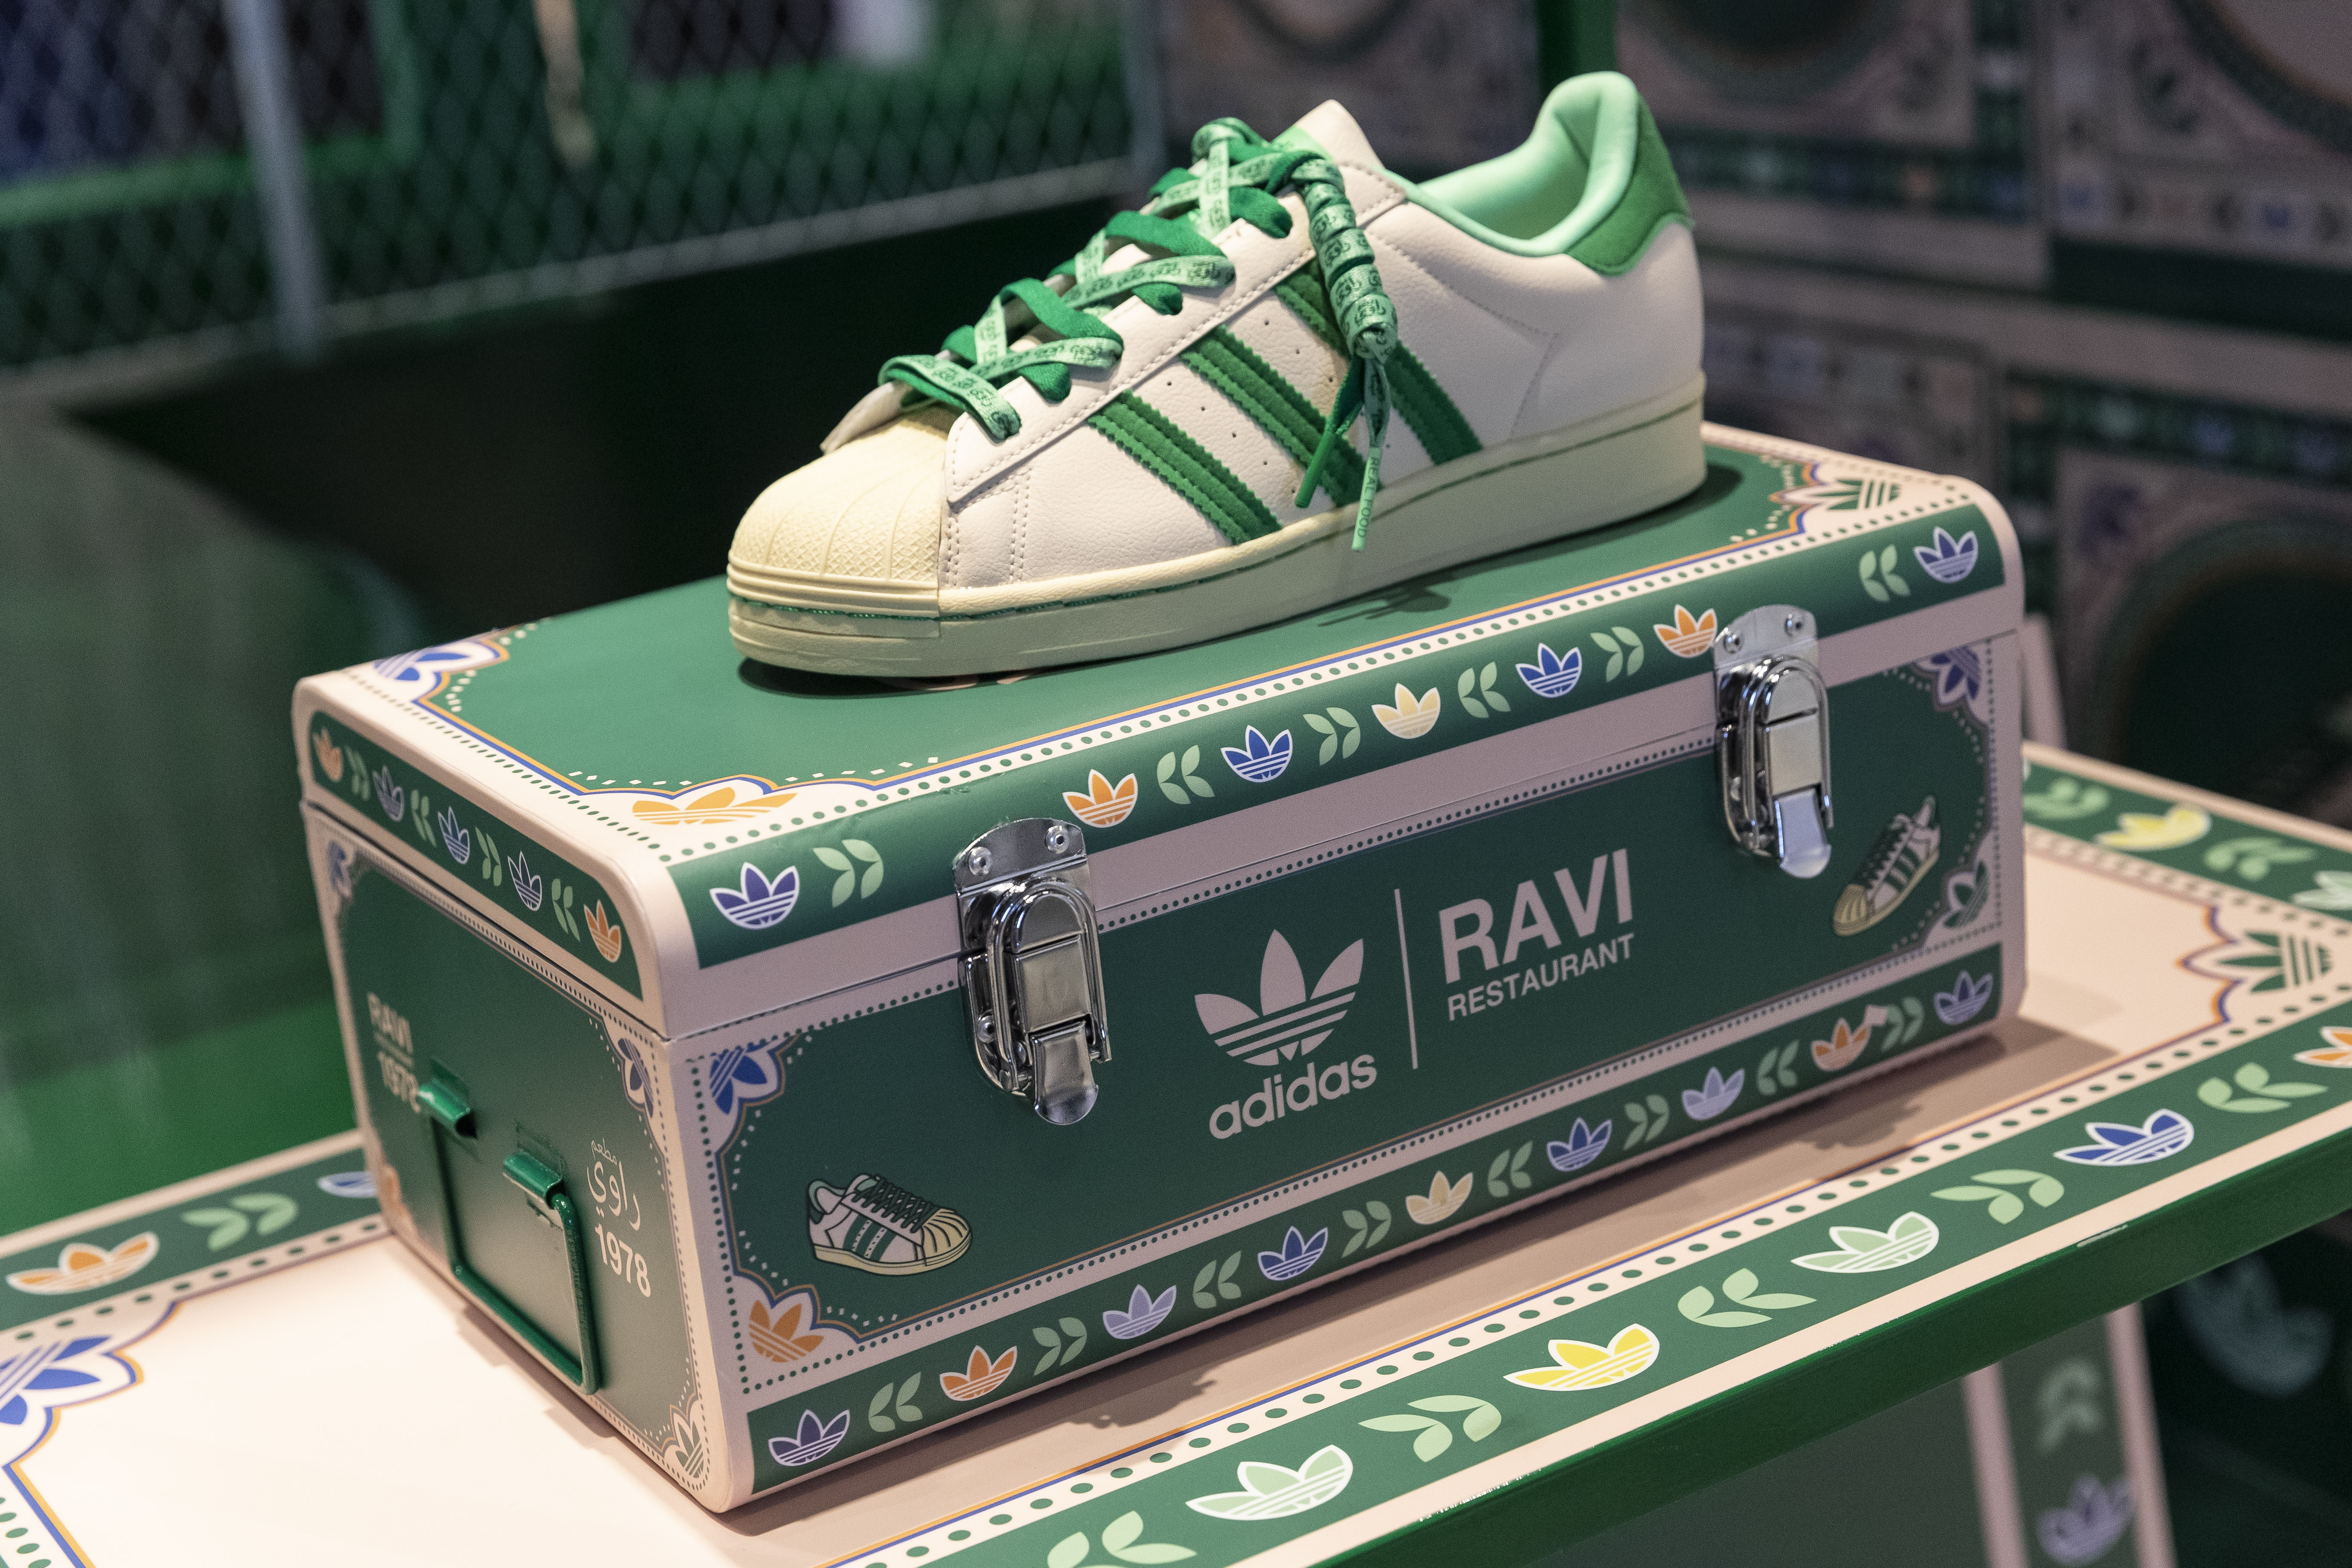 vloot stel voor Tegen de wil Adidas x Ravi Restaurant trainers advertised for up to Dh44,000 on resale  sites